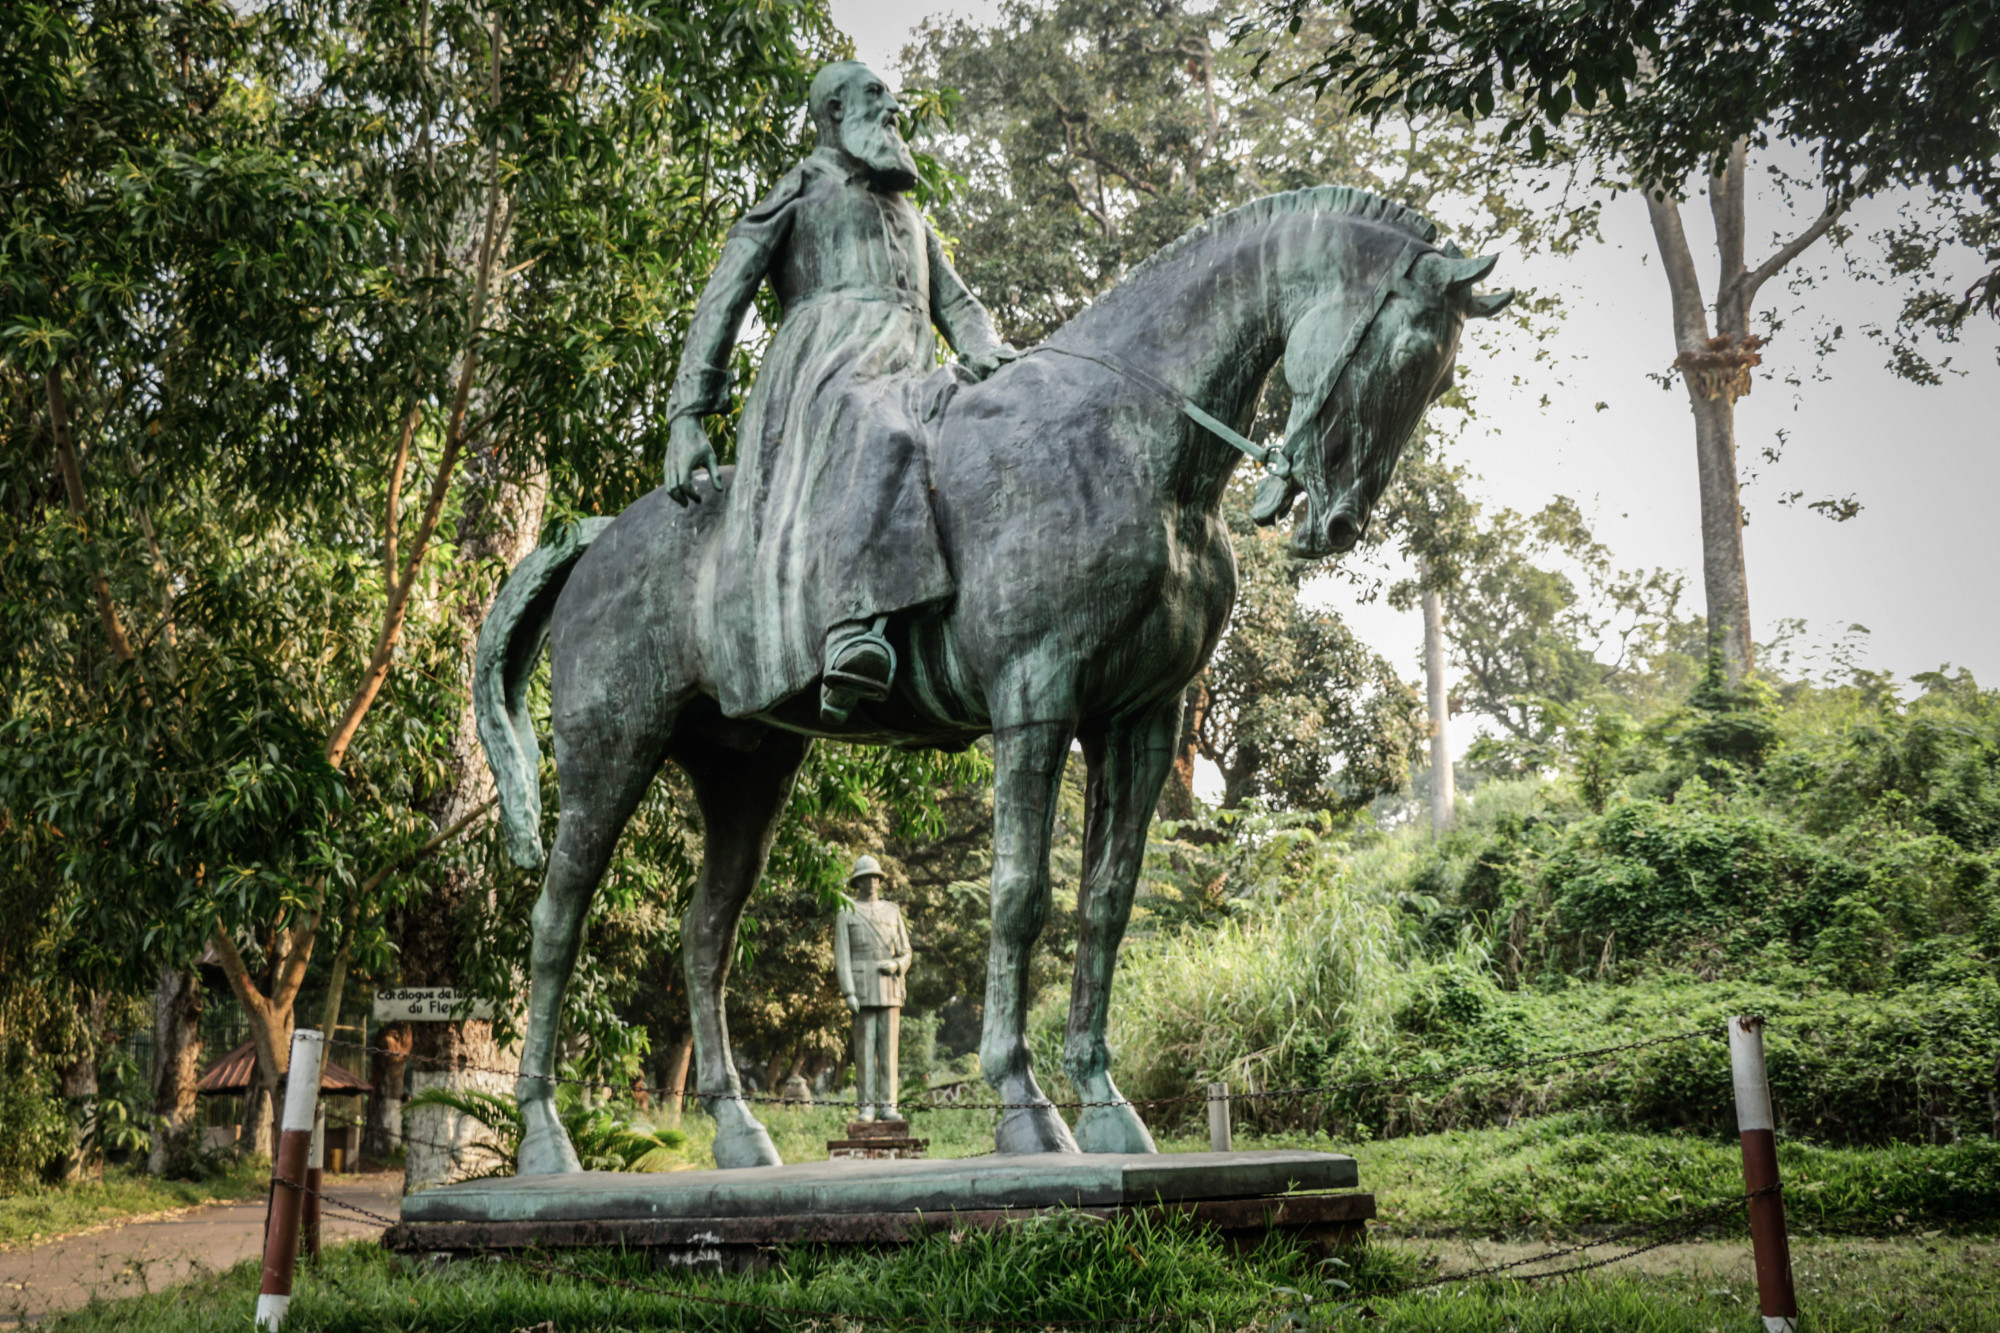 A six-meter statue of King Leopold II at the Institute of National Museums of Congo, in the Mont Ngaliema area of the capital Kinshasa last week. Inaugurated in 1928 by Albert I, the work was first installed in front of the Palace of the Nation, where the presidency is currently located. The monument was removed in 1967 on the orders of then dictator Mobutu Sese Seko, at the height of his “return to national and African authenticity” policy that sought to rename colonial places. Forgotten for almost four decades, the statue made a sudden reappearance in Kinshasa city centre, on the June 30 Boulevard — the date of independence — in February 2005. For unknown reasons, the statue was taken down again after 24 hours, by the same workers who had erected it. The statue finally reached Ngaliema Park, rehabilitated in 2010 with the help of the United Nations Mission in the Congo, known as Monusco. A statue of King Albert I, Leopold’s nephew and successor, can be seen beneath the horse. Kinshasa, RDC, June 2020 © Justin Makangara for Fondation Carmignac